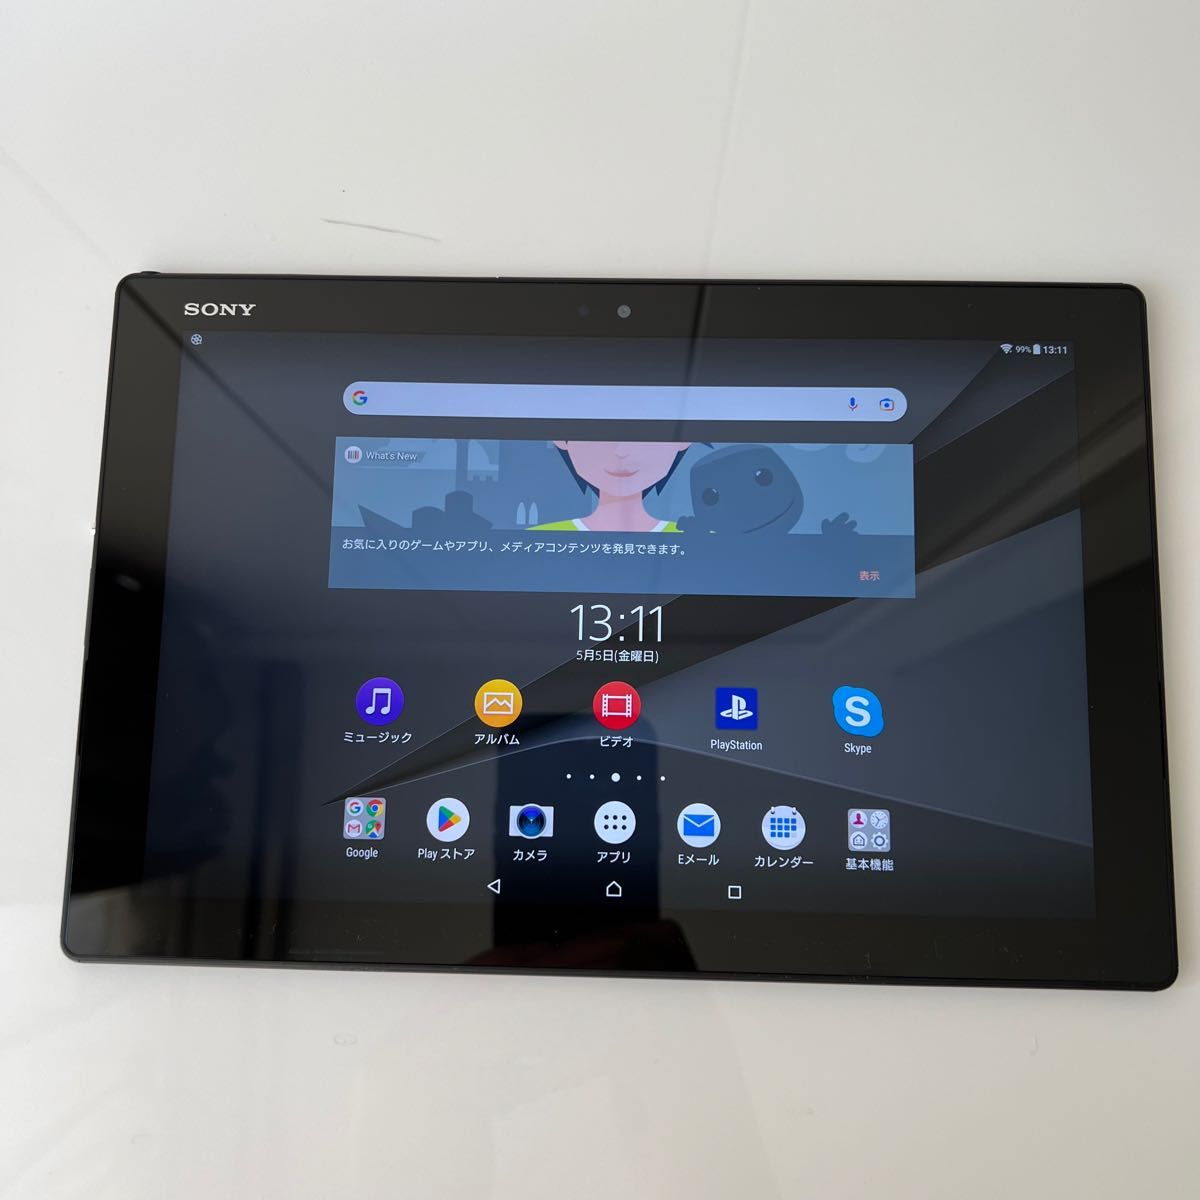 xperia z4 tablet wifiモデル｜PayPayフリマ